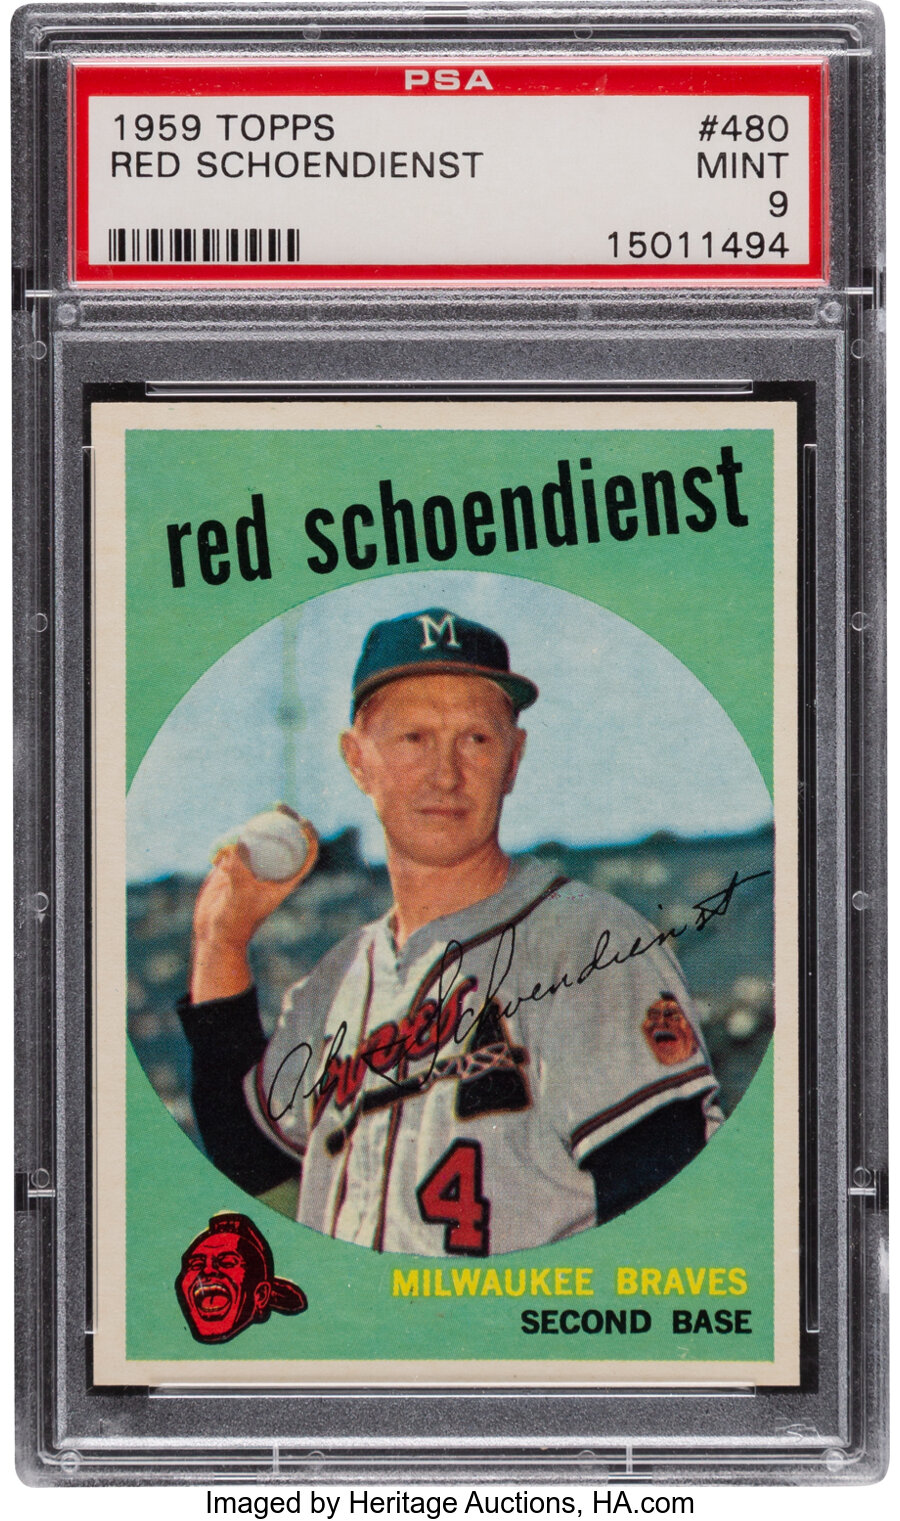 1959 Topps Red Schoendienst #480 PSA Mint 9 - Only One Higher